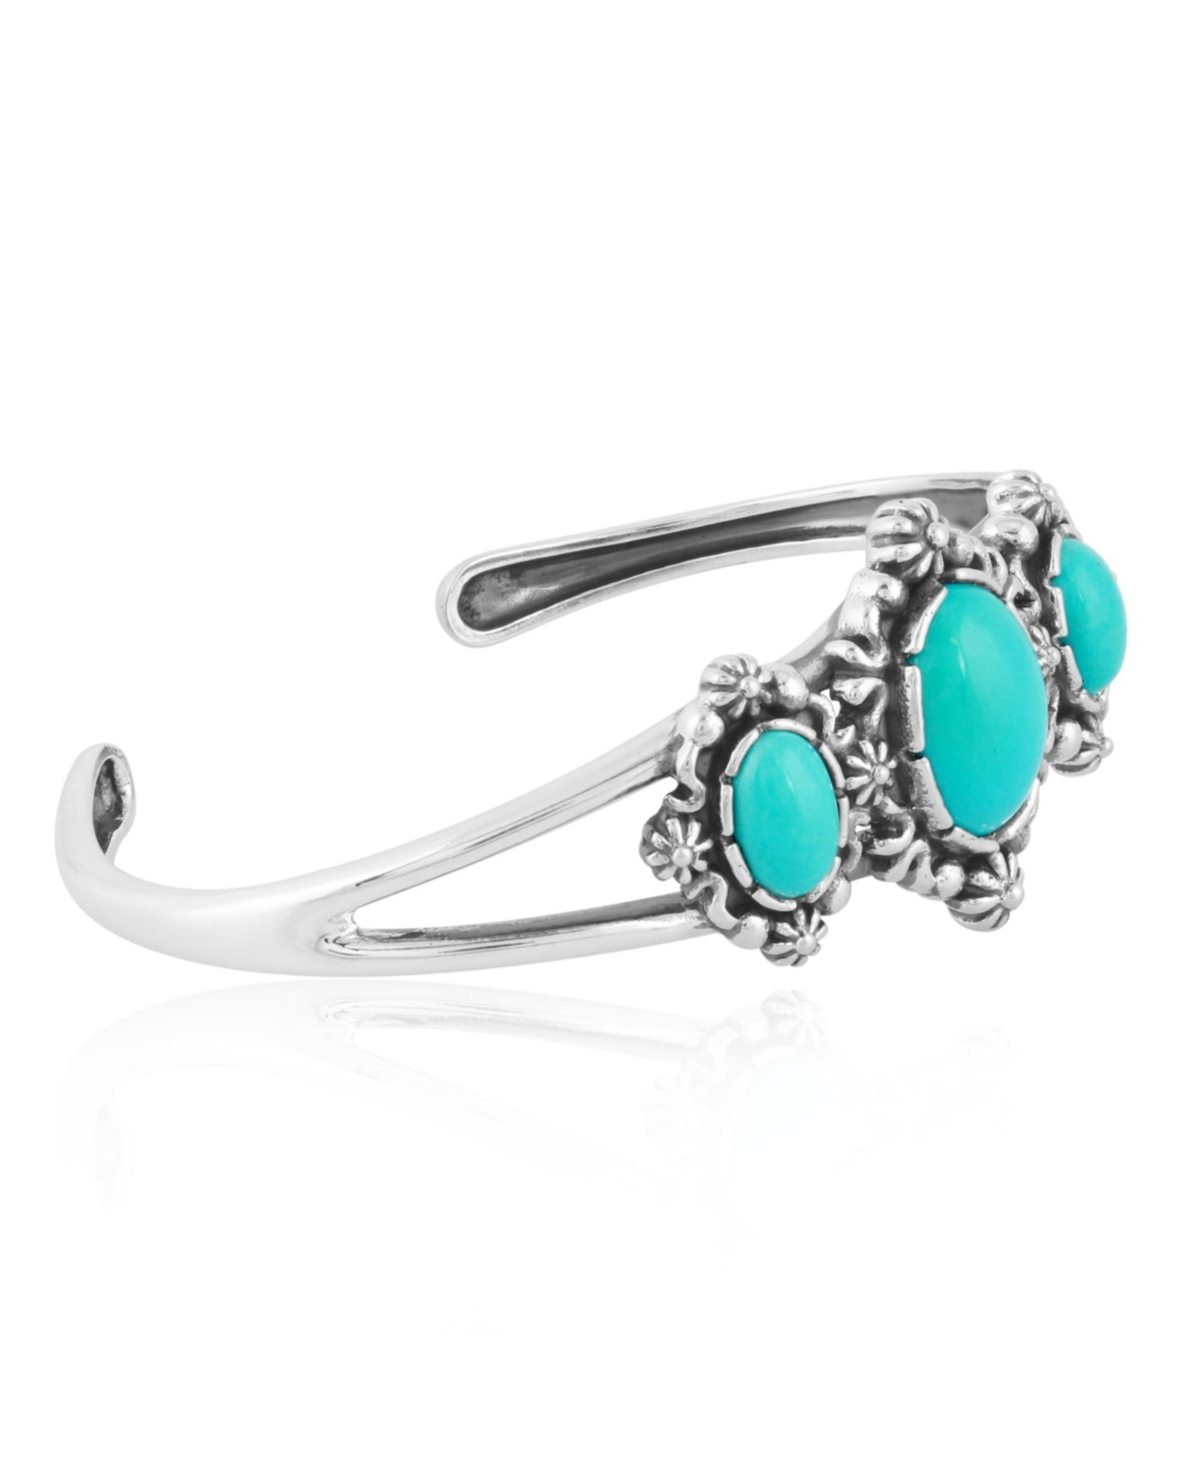 Sterling Silver Women's Cuff Bracelet Blue Turquoise Gemstone Size Small - Large - Blue turquoise